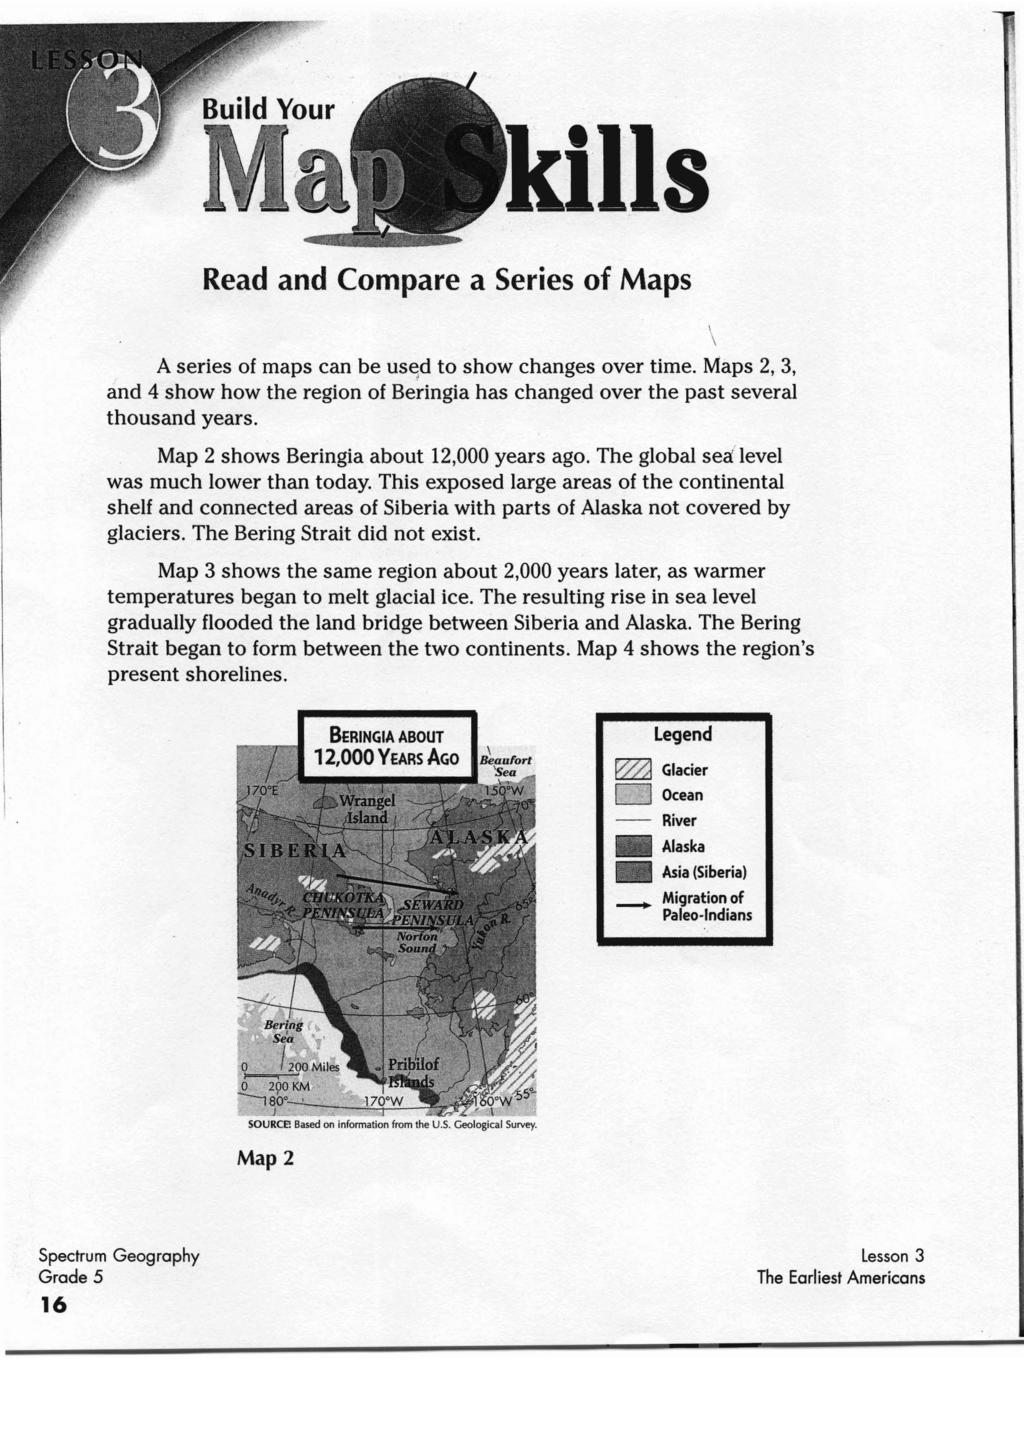 kills Read and Compare a Series of Maps A series of maps can be used to show changes over time. Maps 2, 3, and 4 show how the region of Beringia has changed over the past several thousand years.